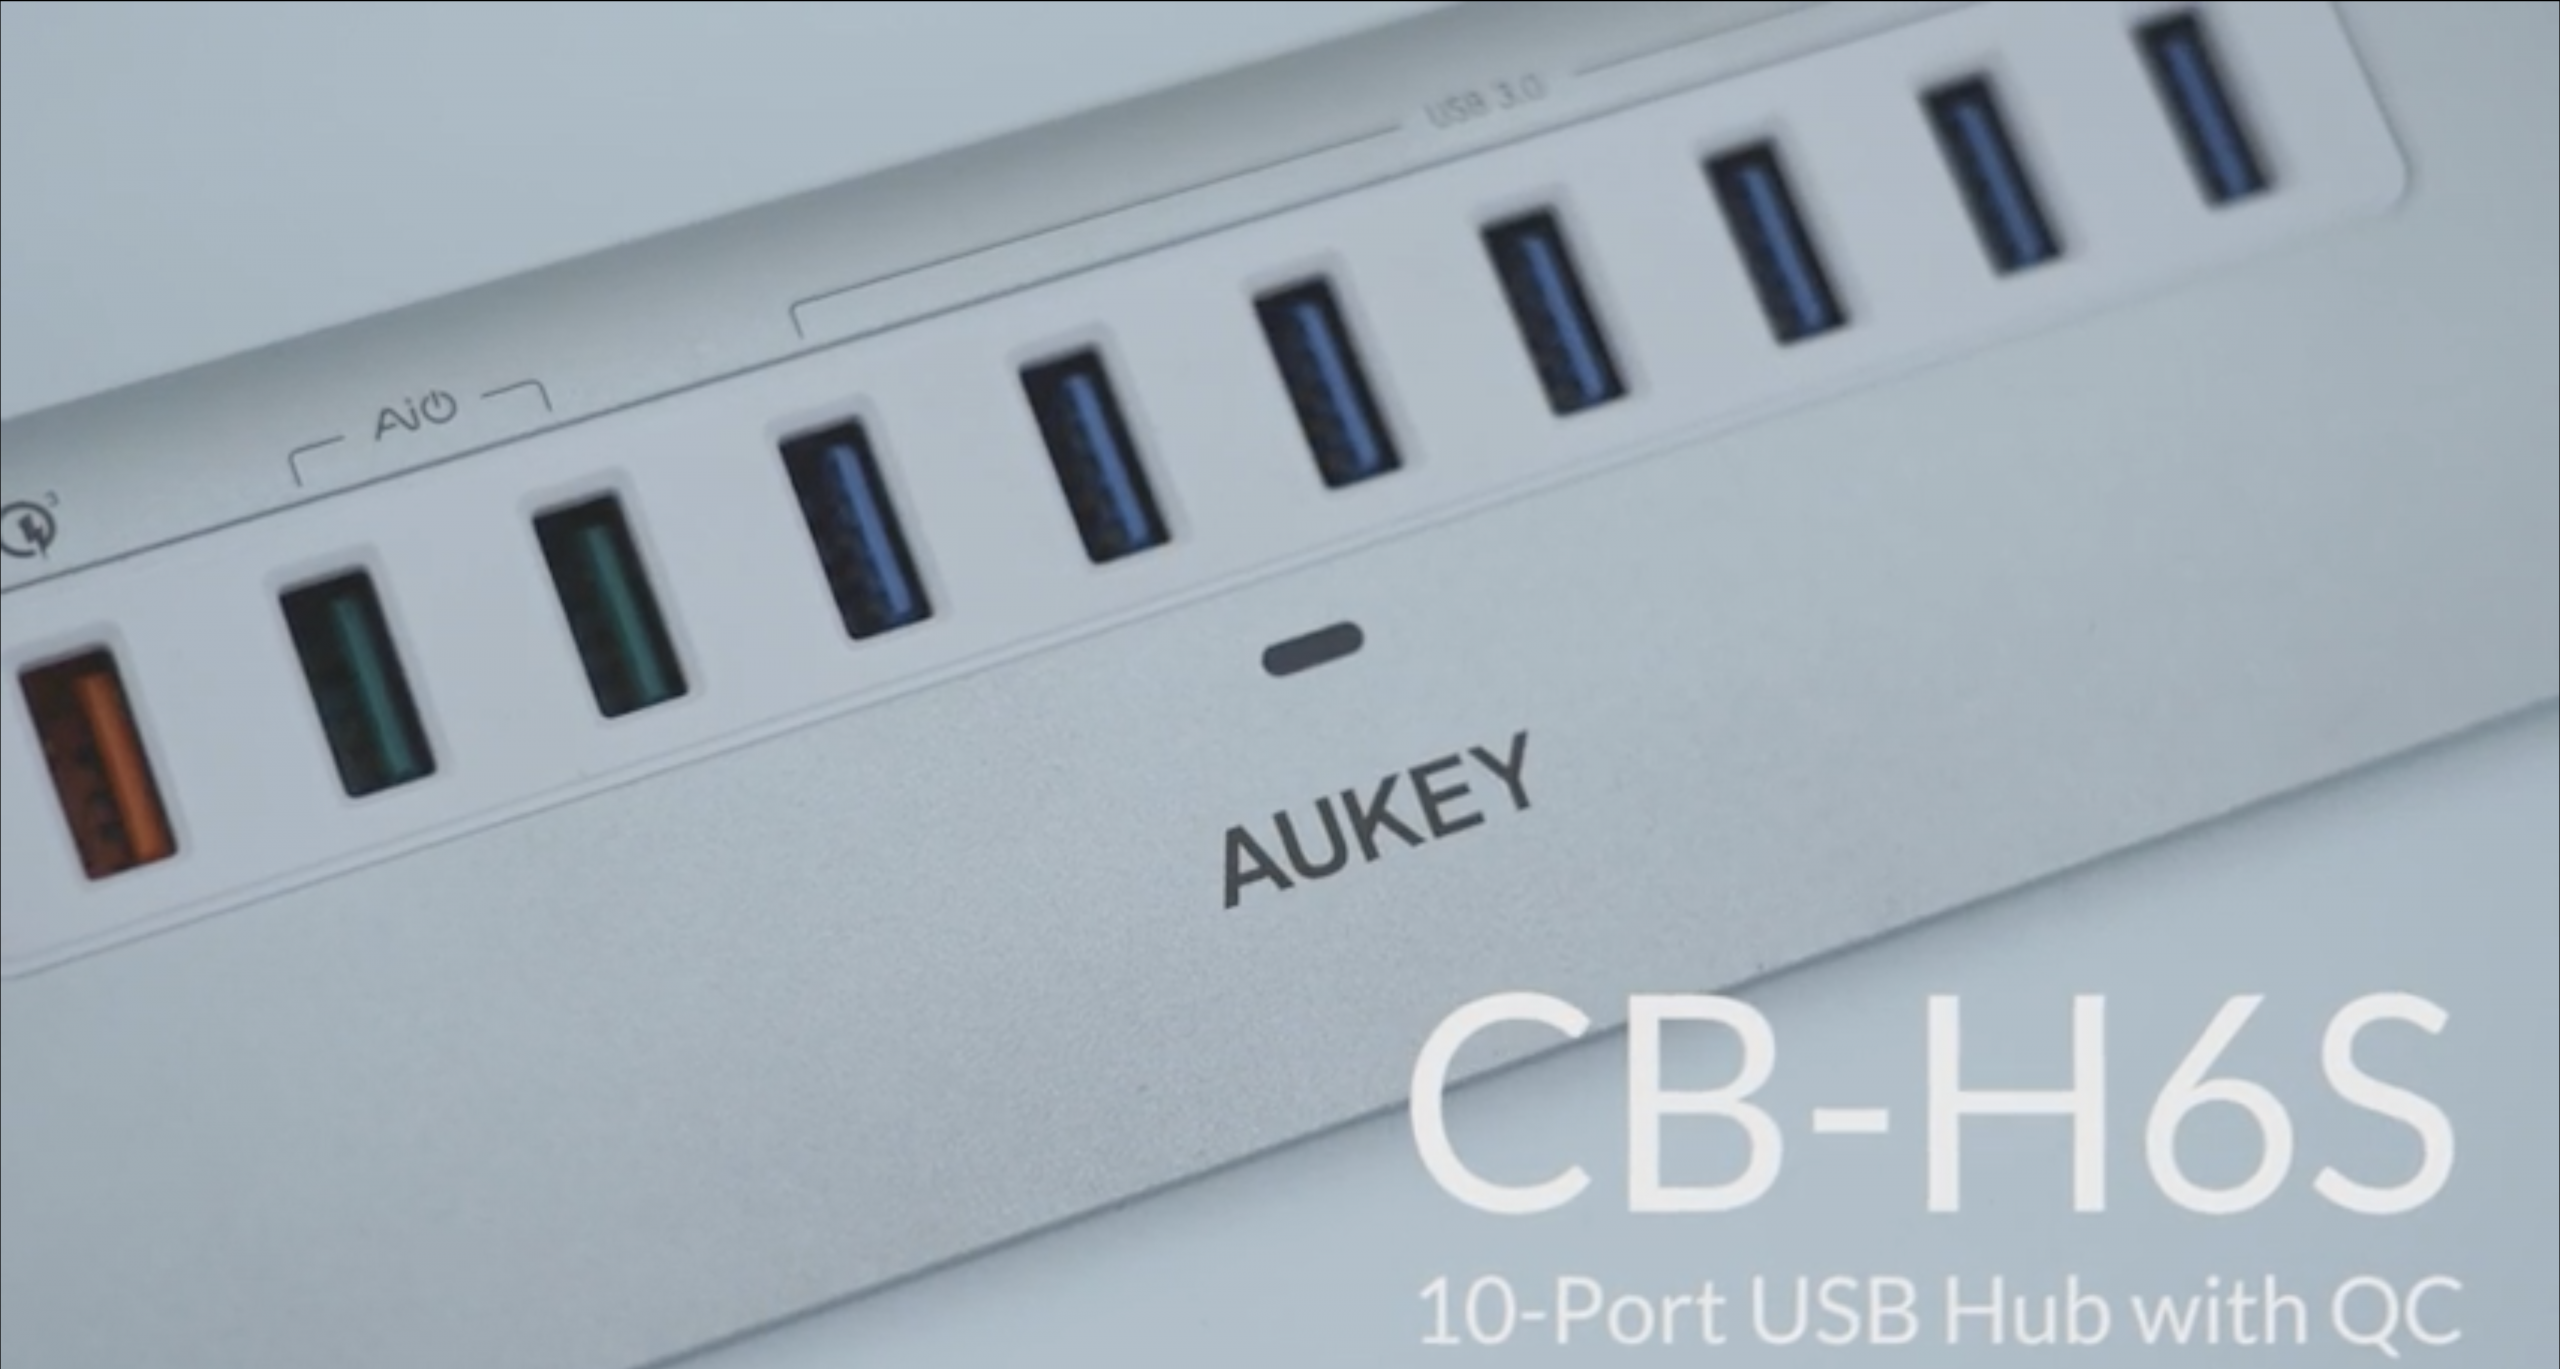 Aukey CB-H6S Review